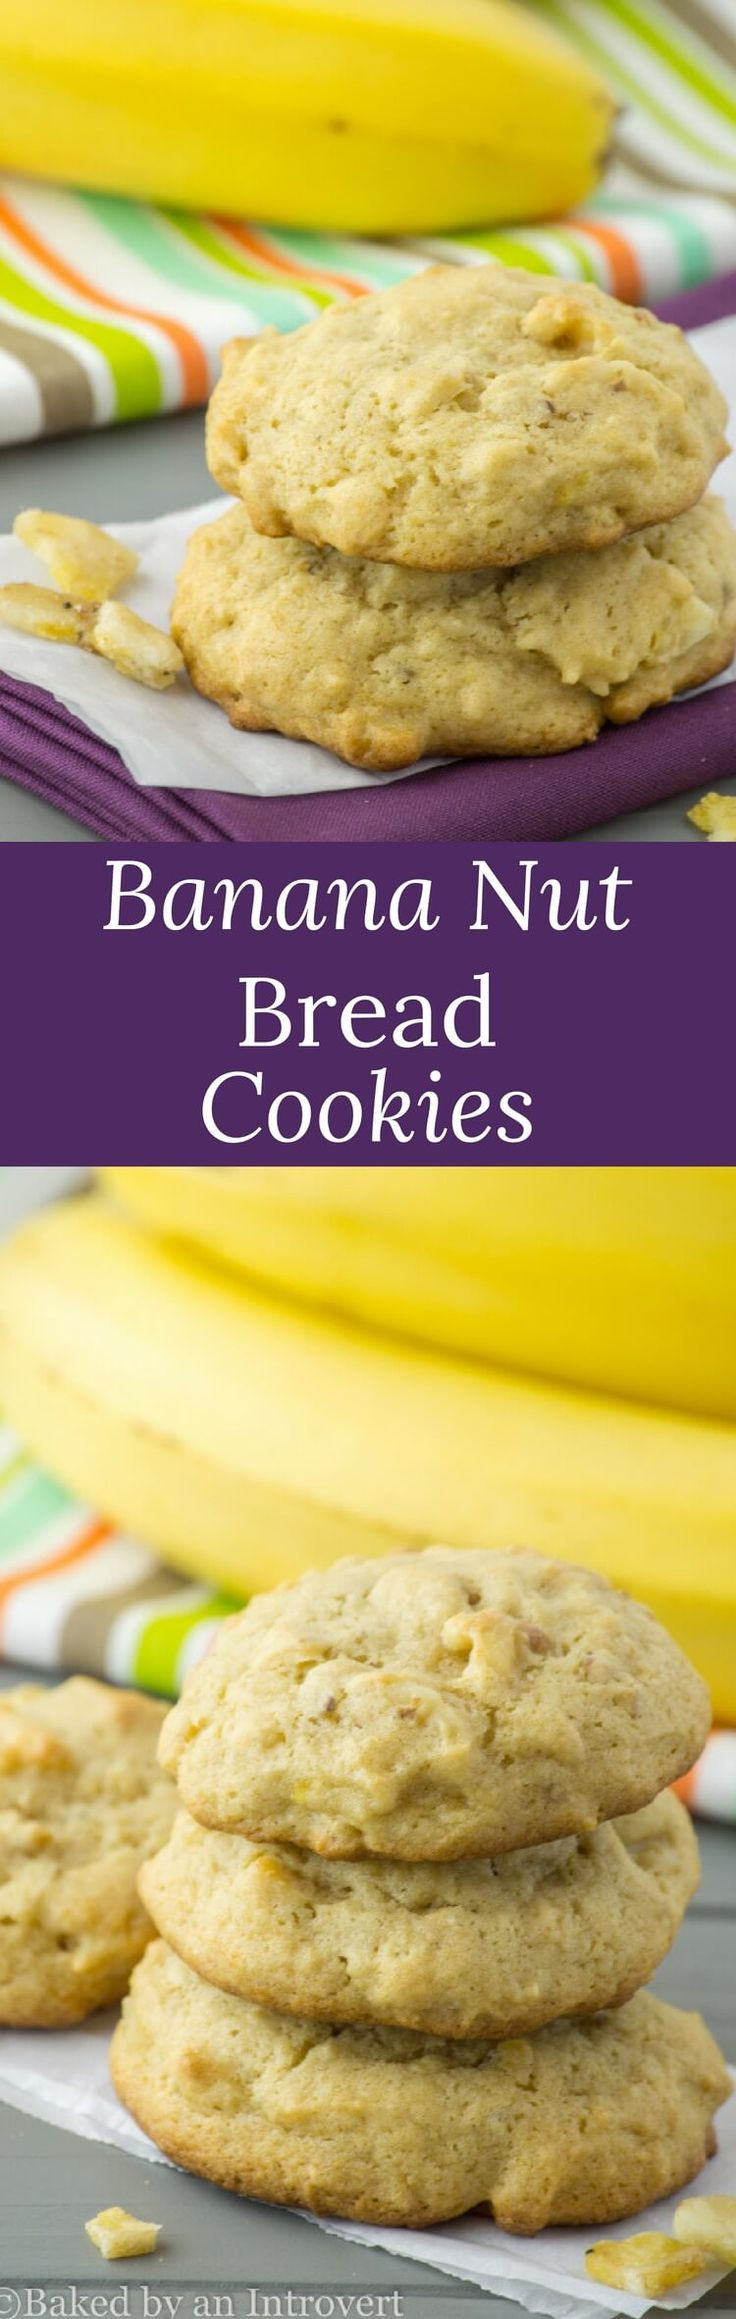 Banana Nut Cookies
 427 best images about Desserts on Pinterest